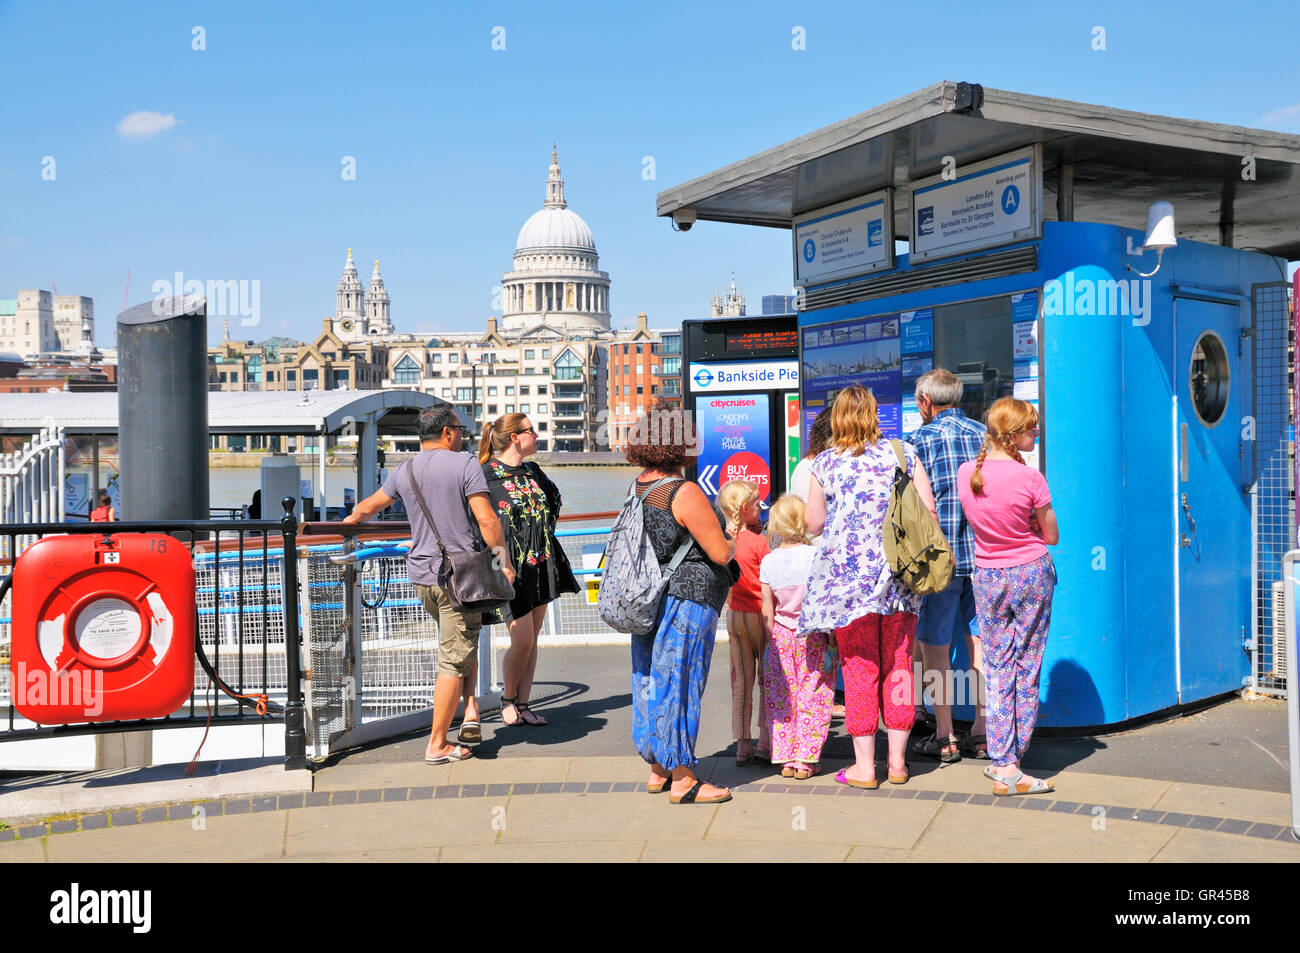 People at Bankside Pier buying tickets for boat cruises on the River Thames, London, England, UK Stock Photo